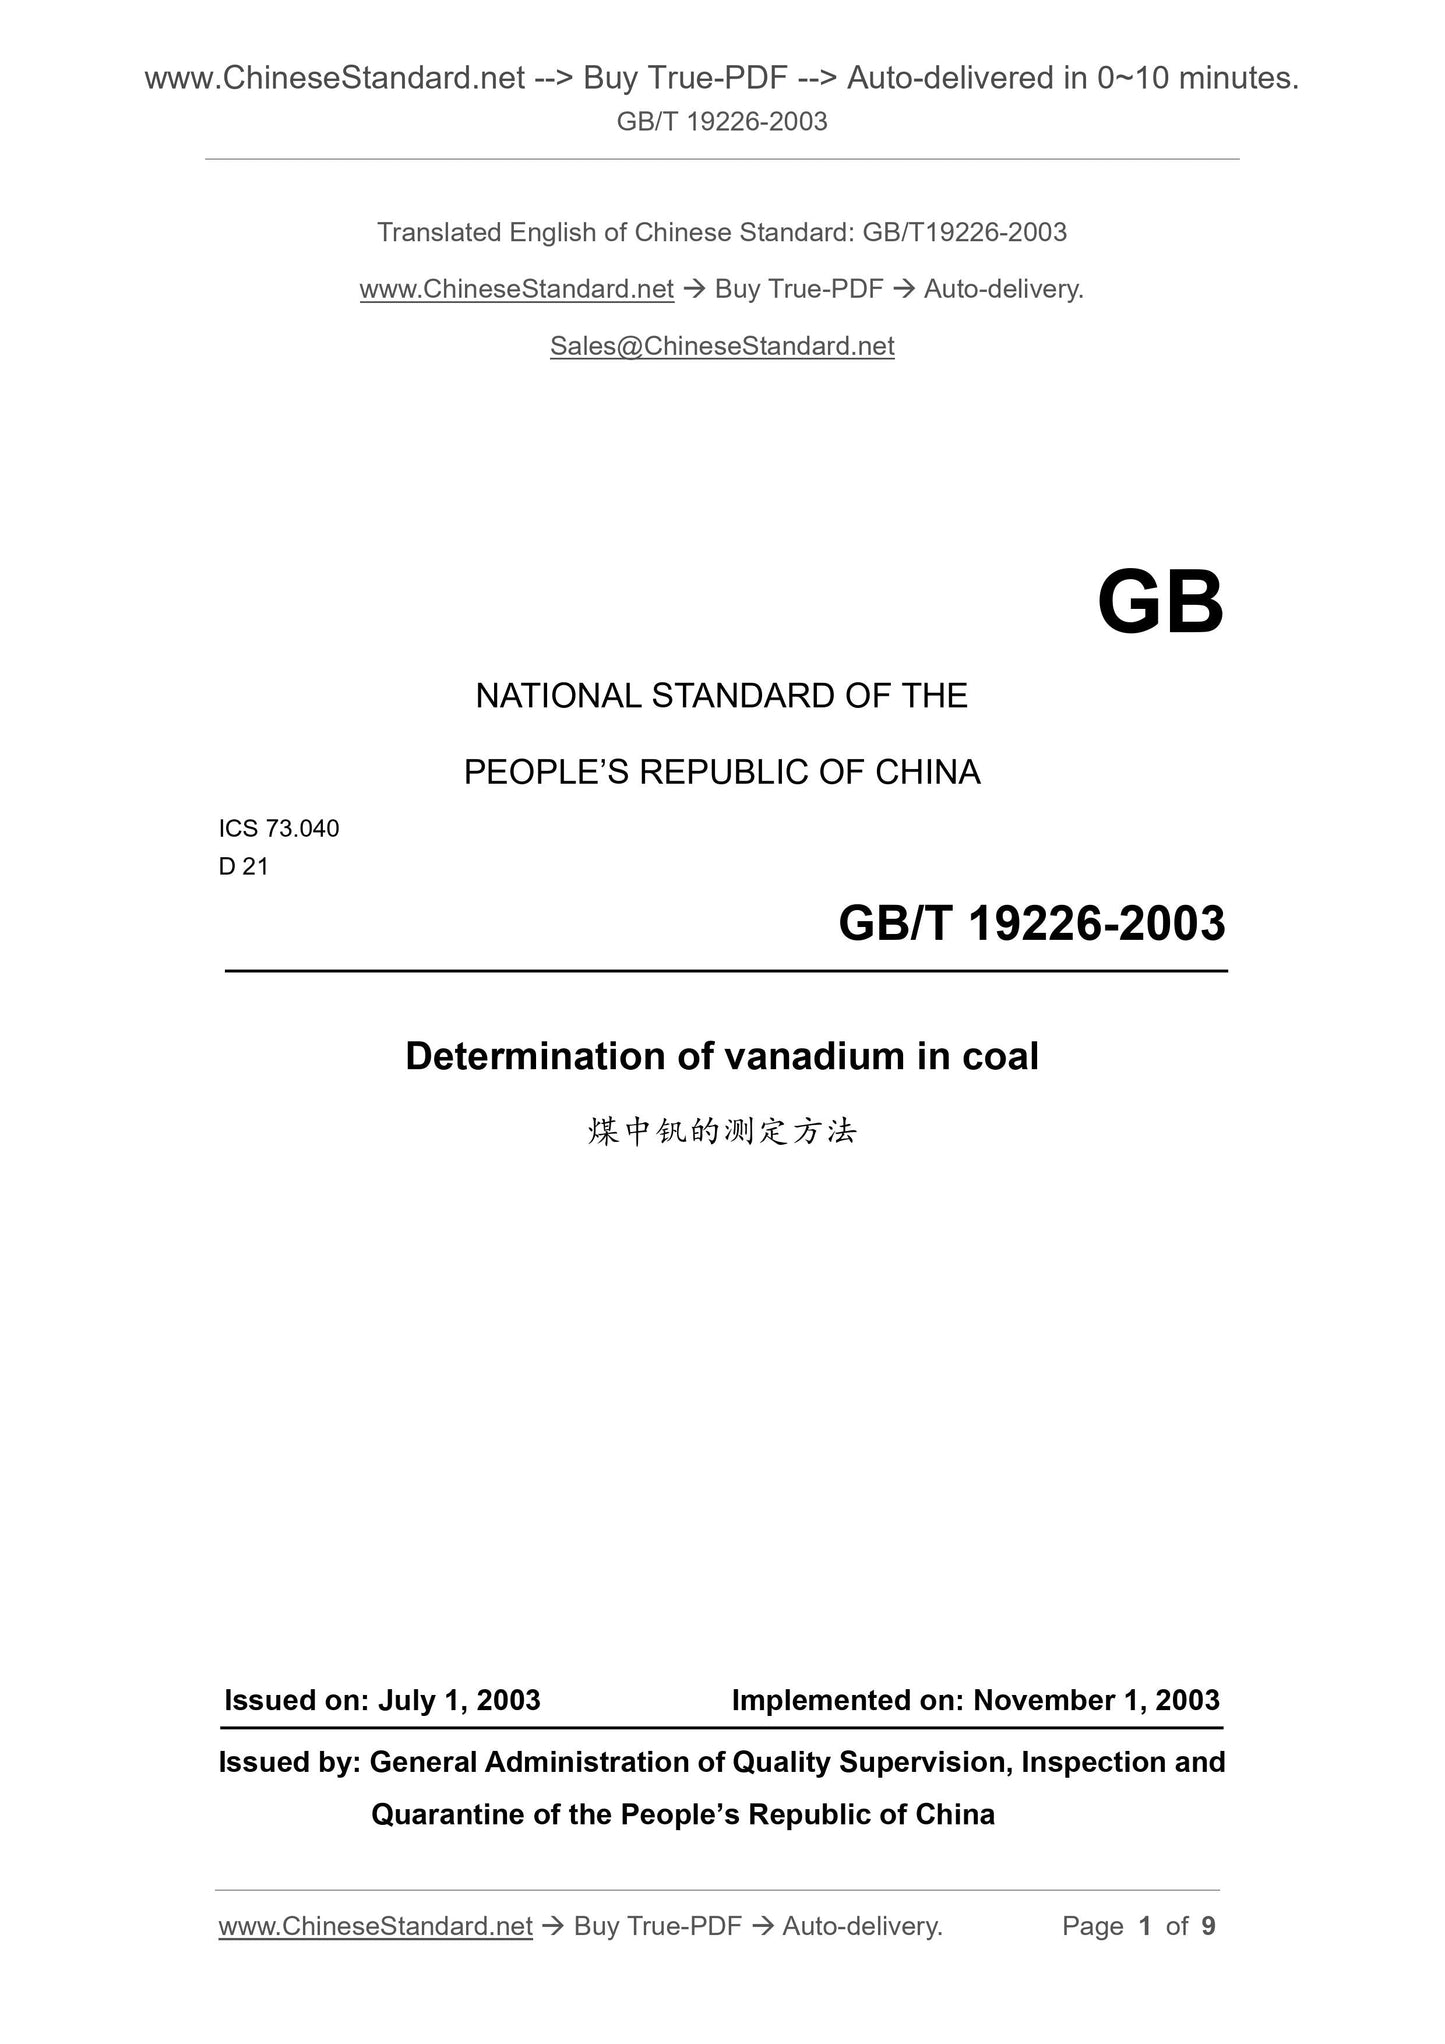 GB/T 19226-2003 Page 1